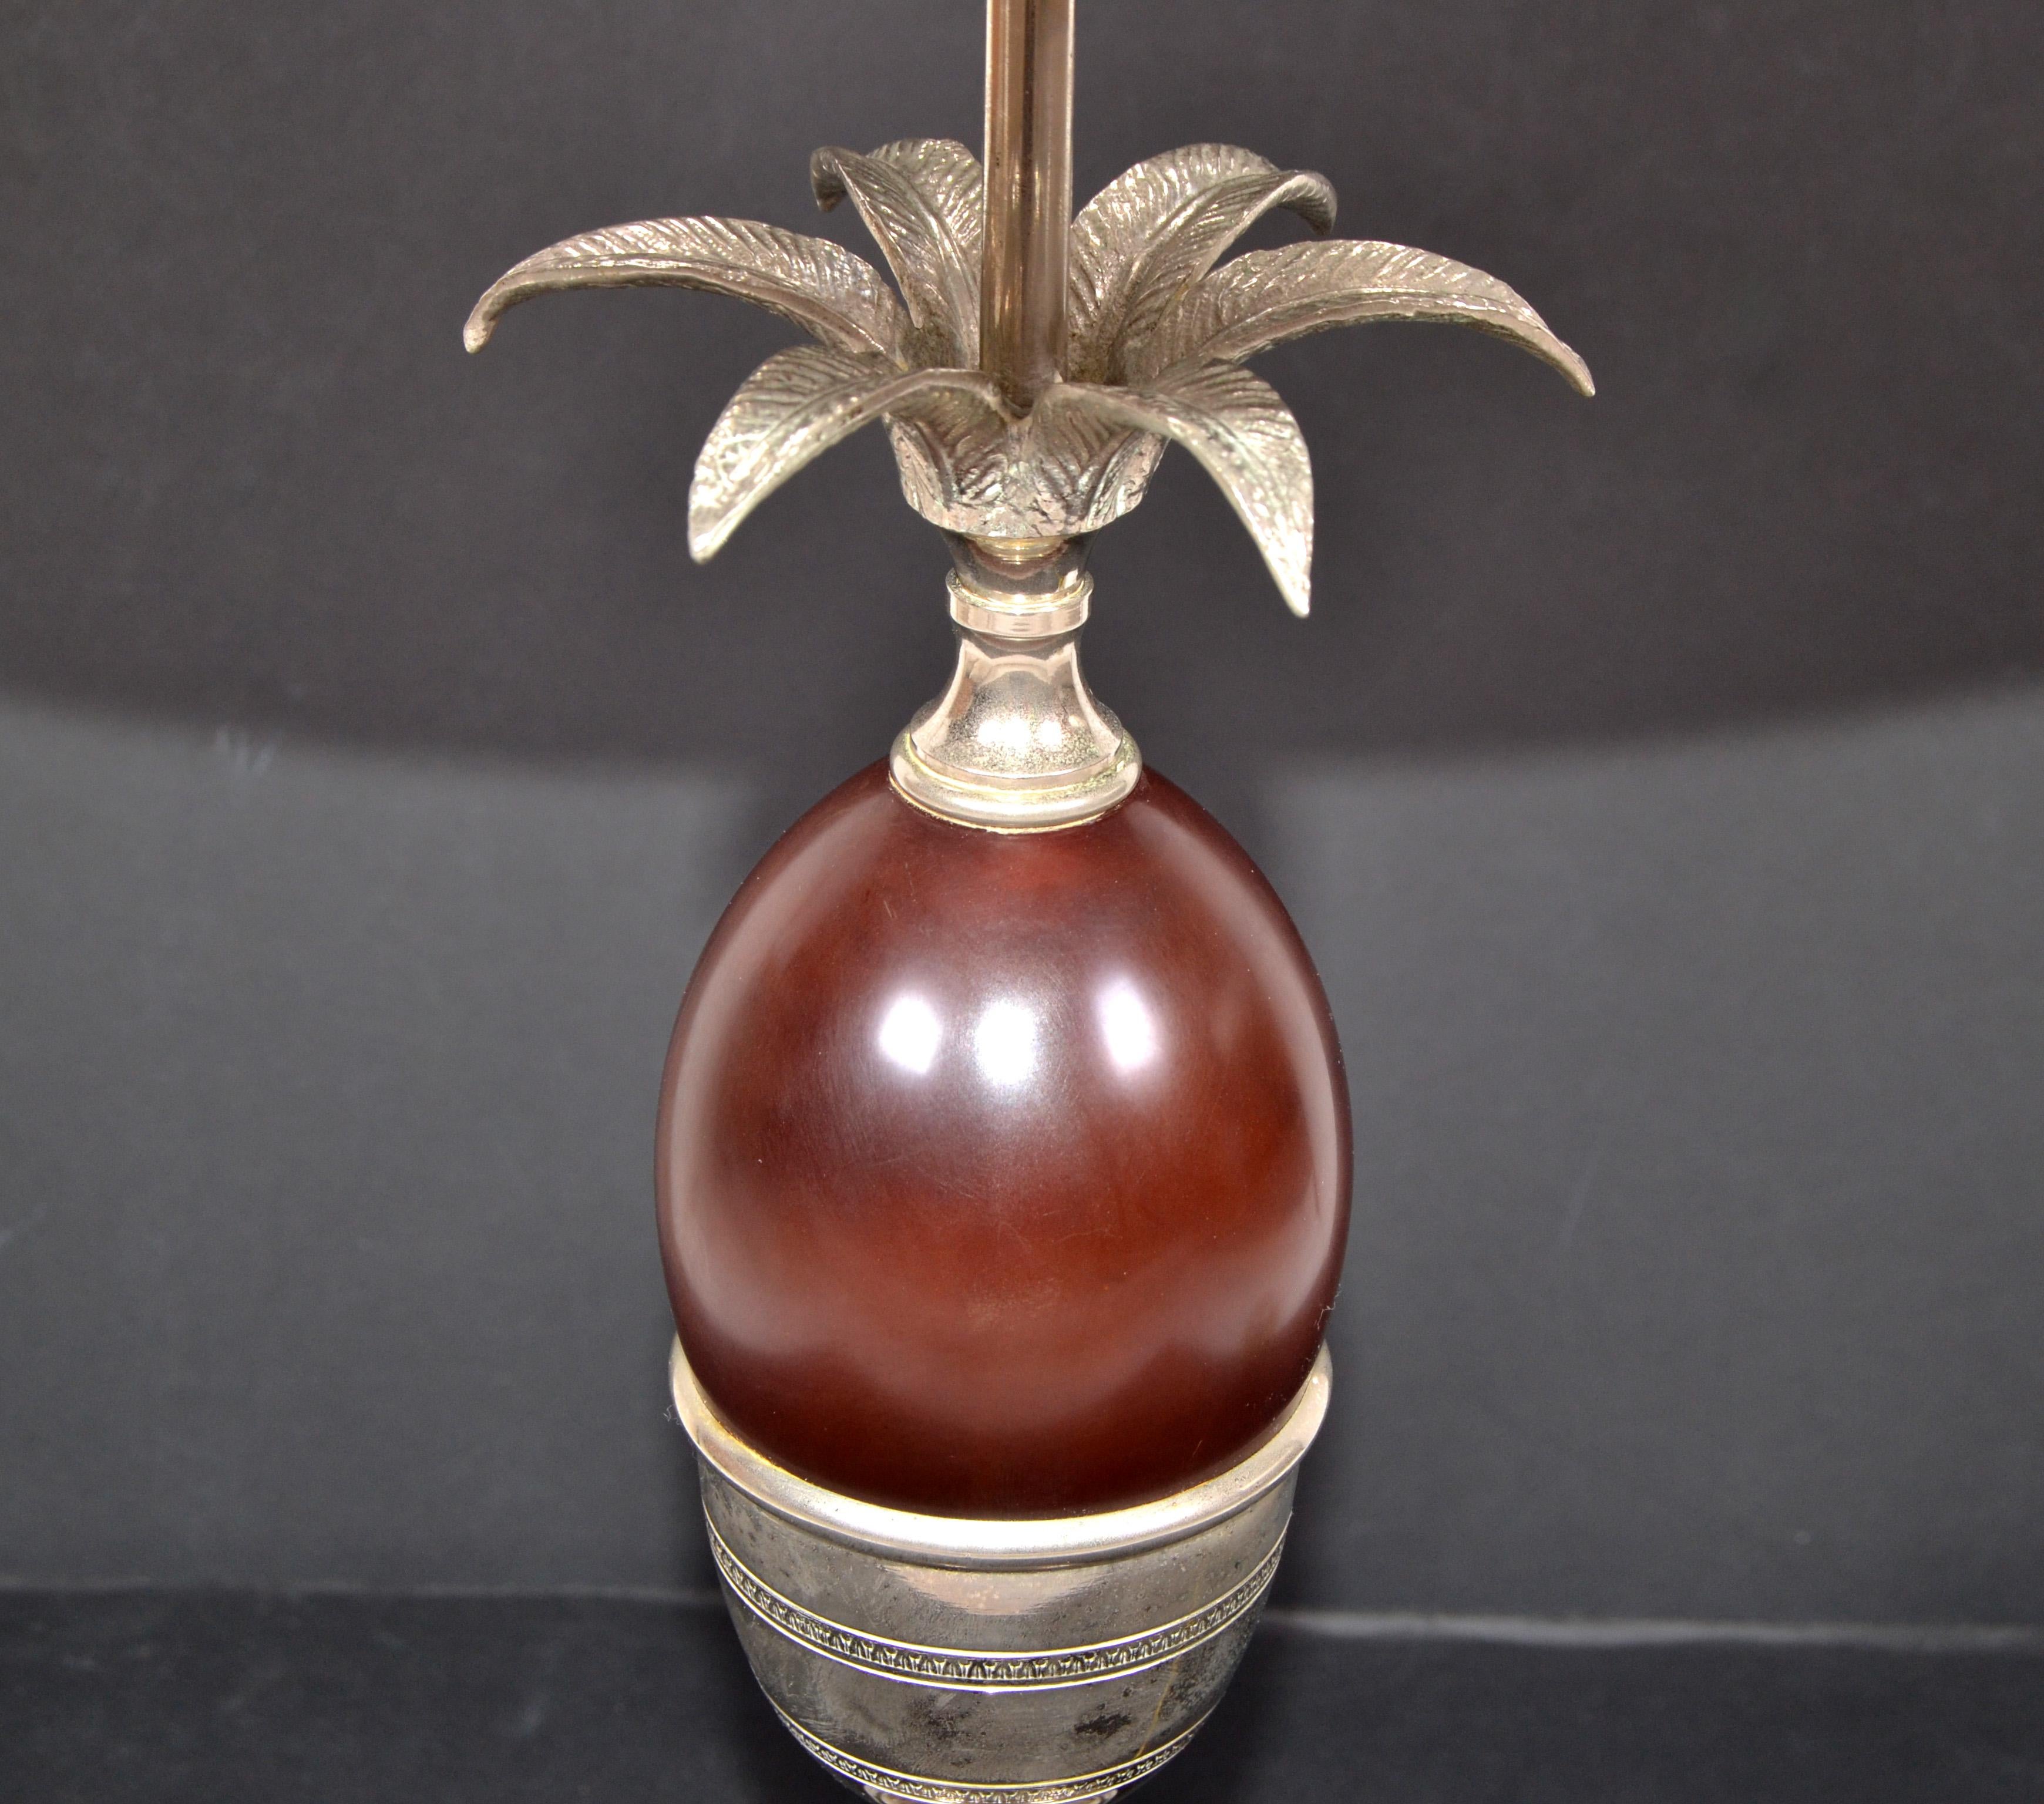 Maison Charles French Art Deco Red Acorn Nickel-Plated Table Lamp & Shade, 1950s In Good Condition For Sale In Miami, FL